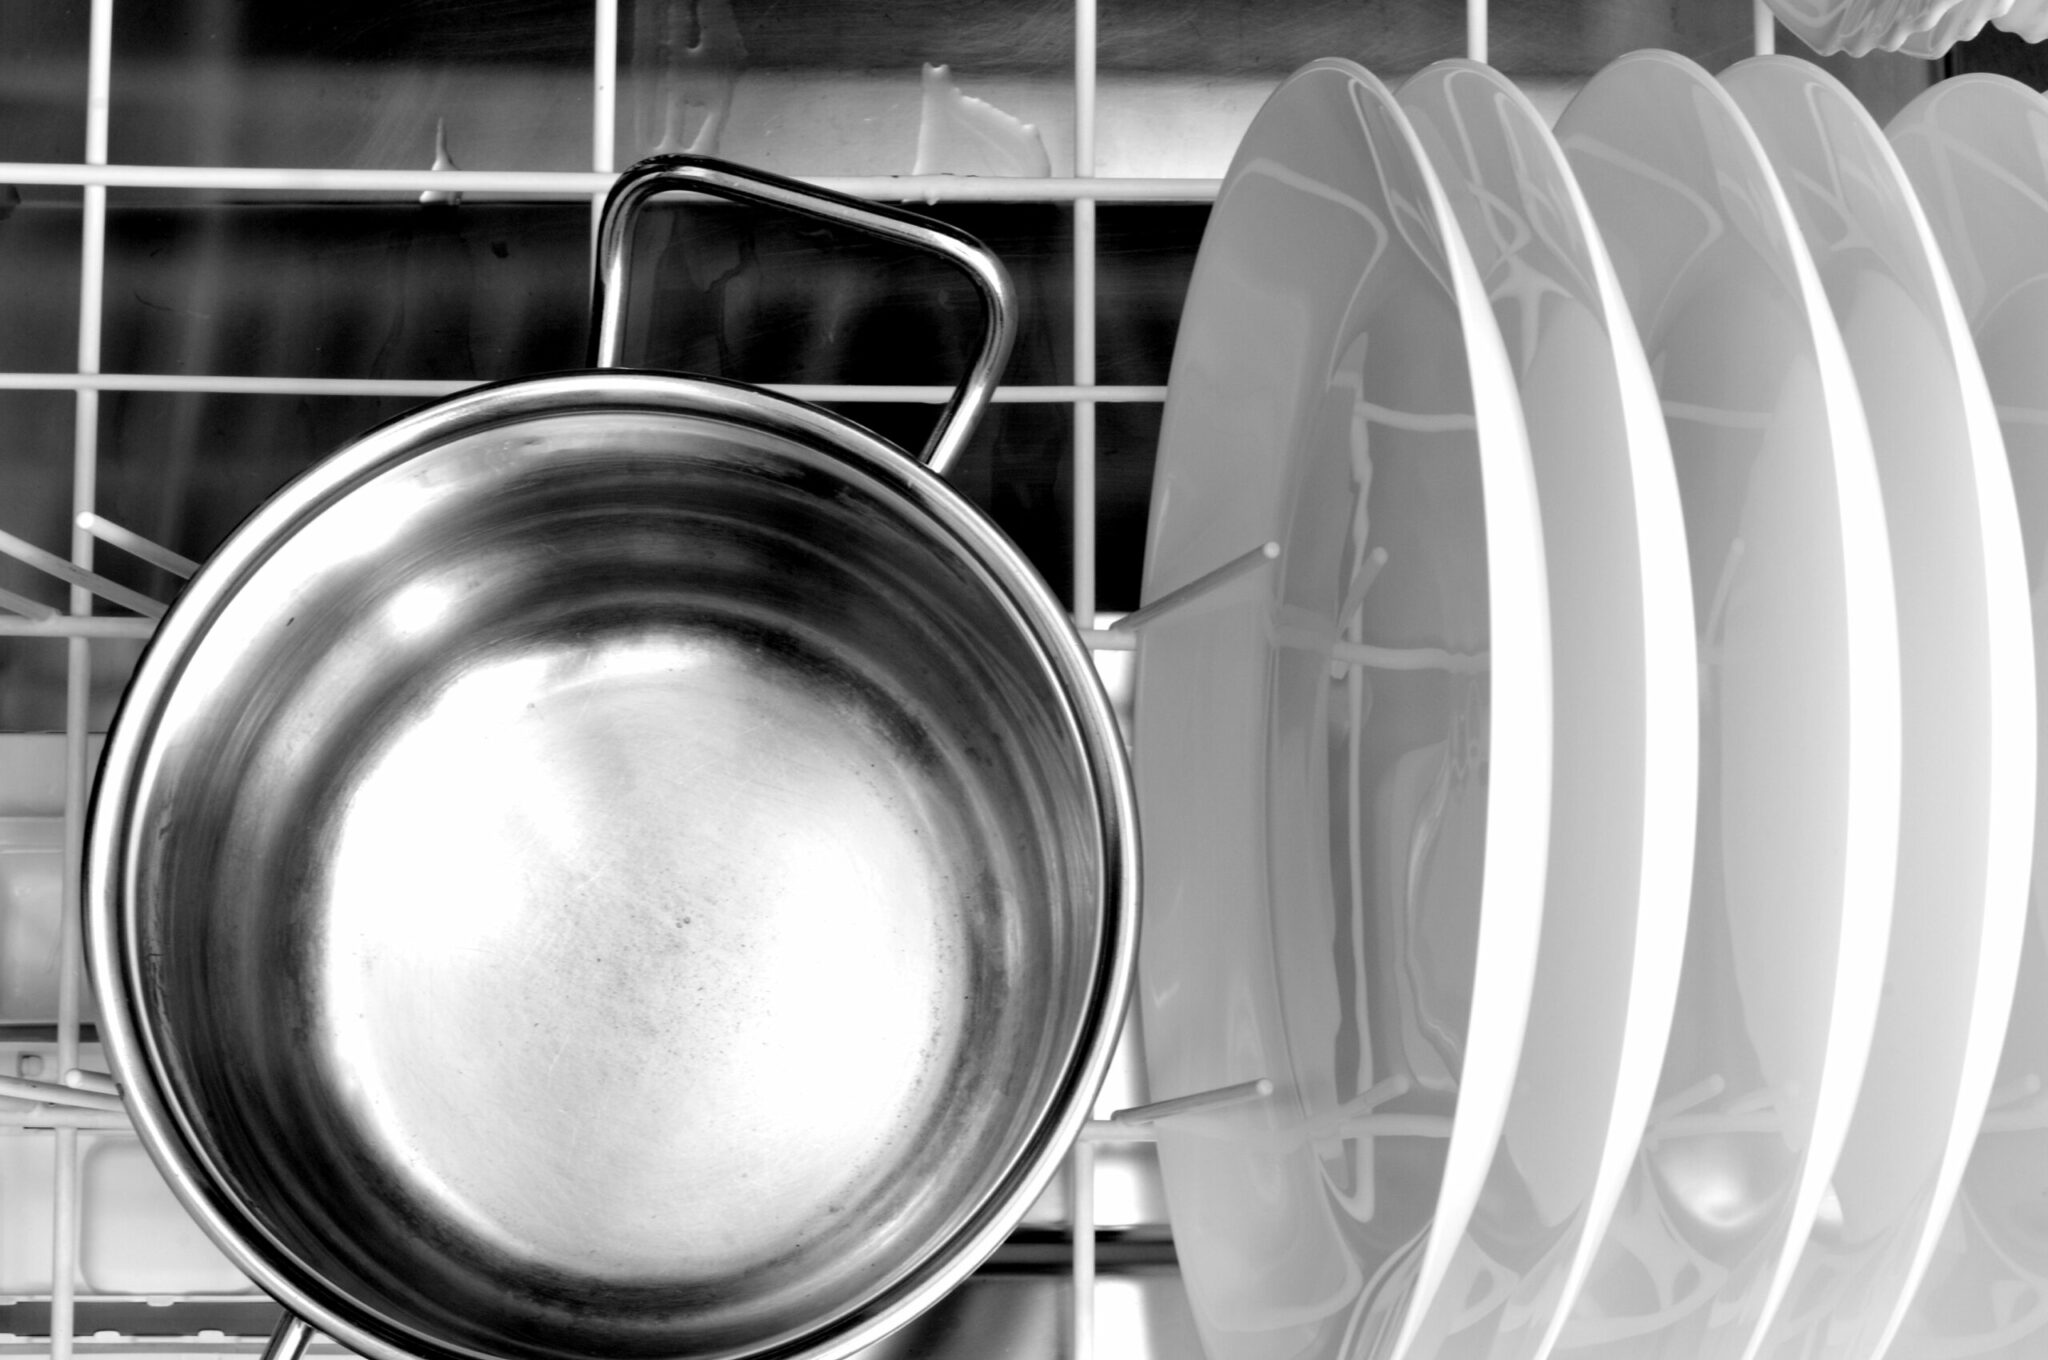 why does aluminum cookware corrode and become discolored in the dishwasher scaled